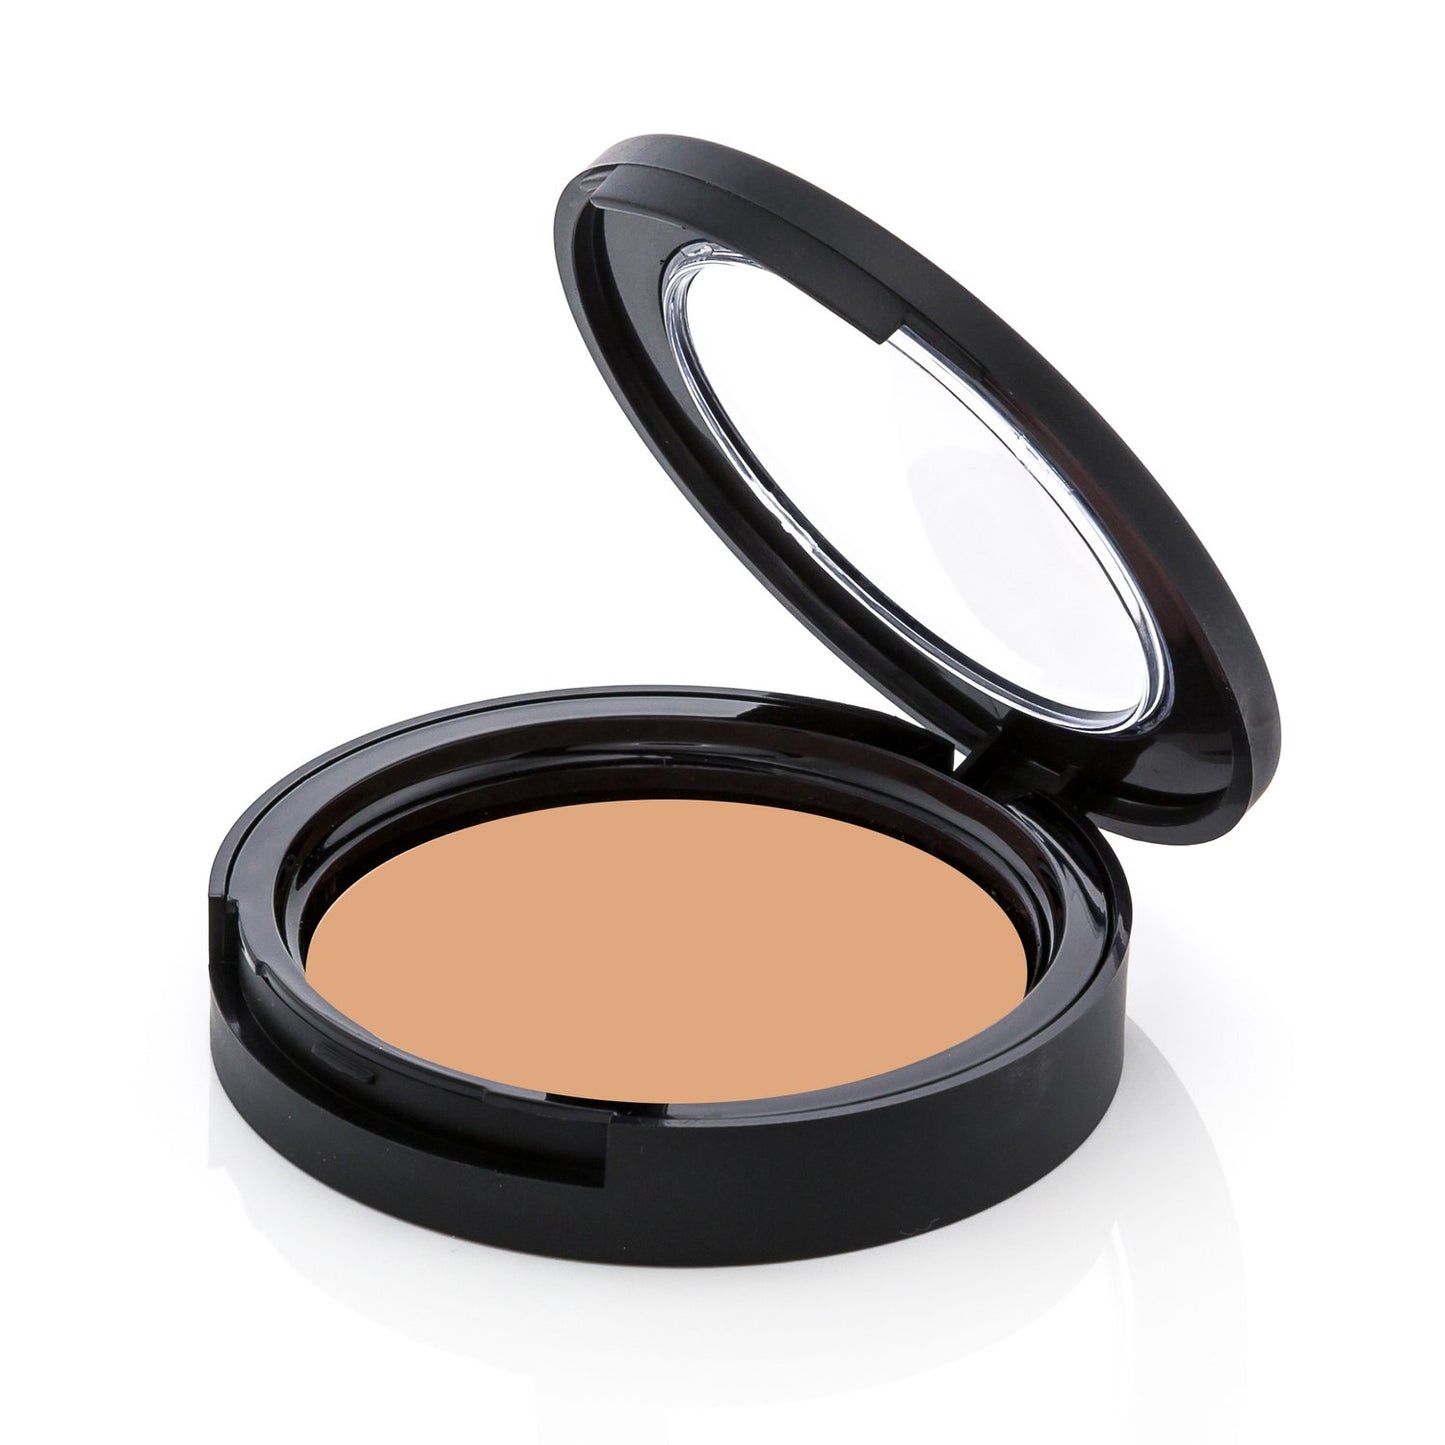 Picture Perfect Foundation Sand Olive